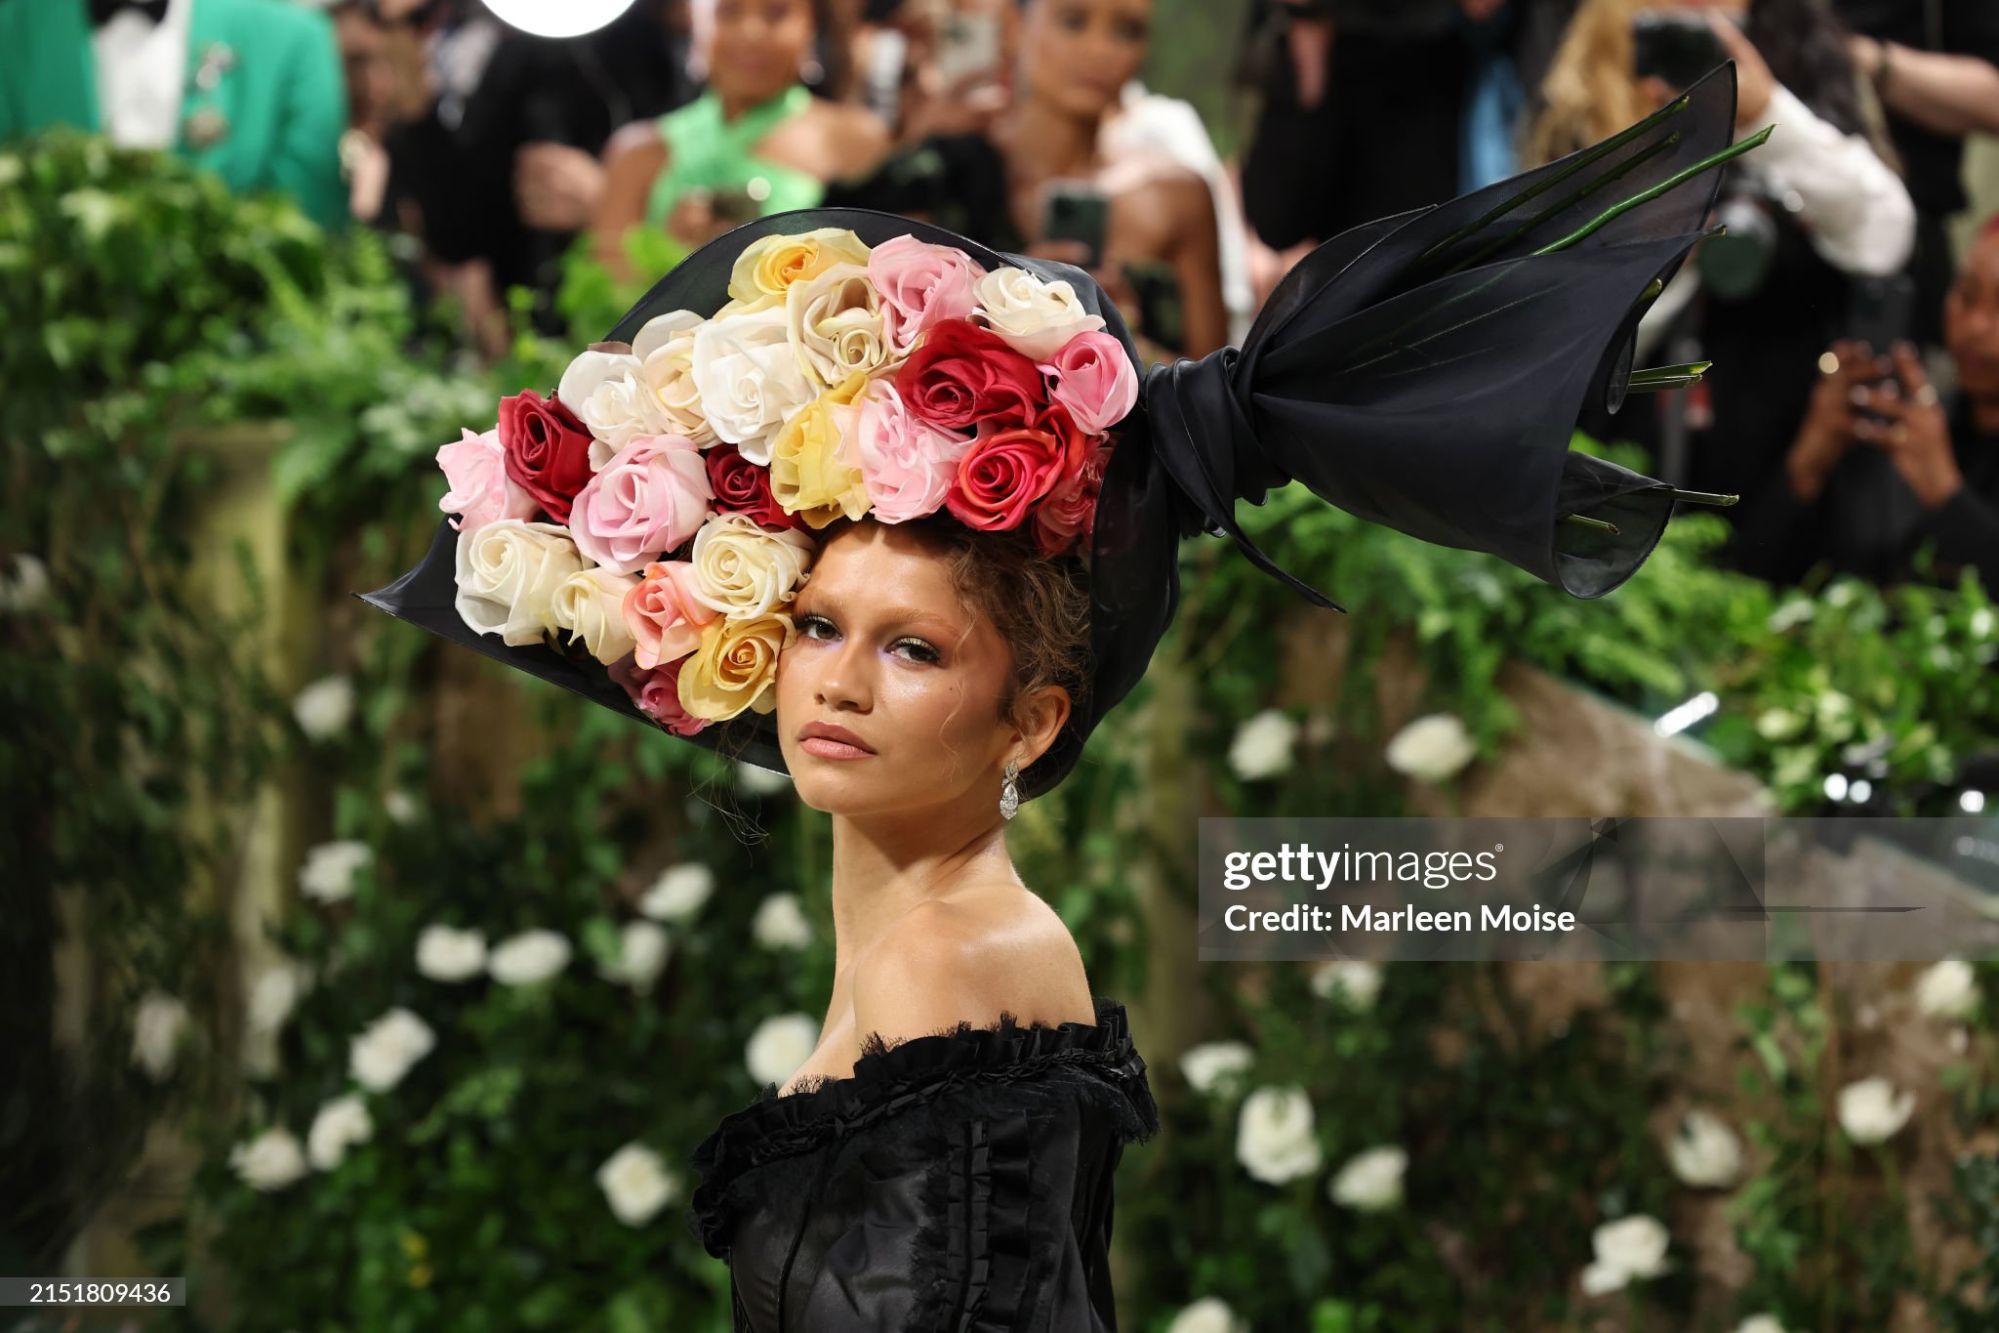 gettyimages-2151809436-2048x2048.jpg